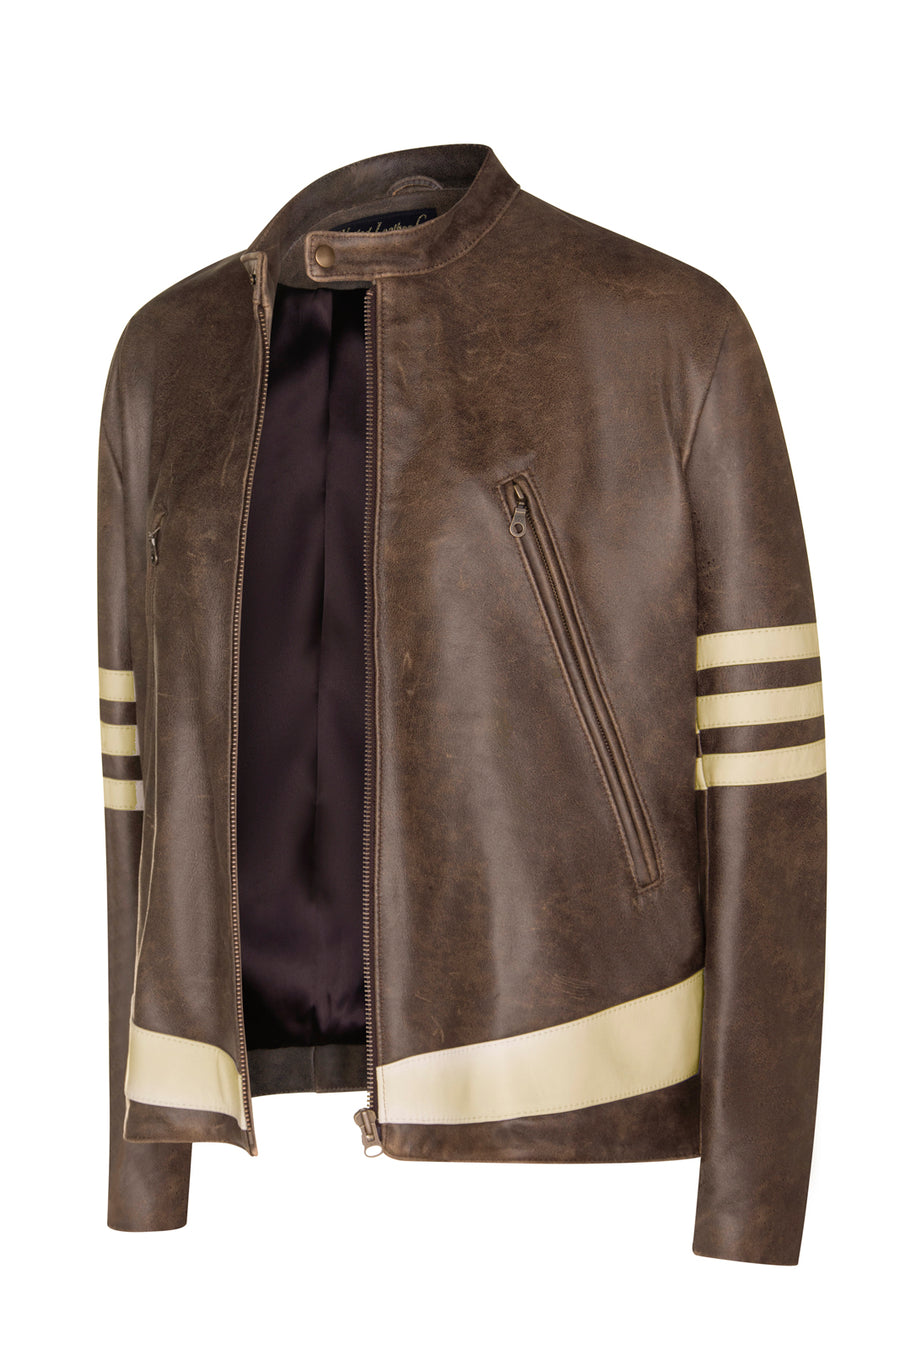 X-Men 1 Wolverine Style Leather Jacket with Cream Stripes As Worn by Hugh Jackman